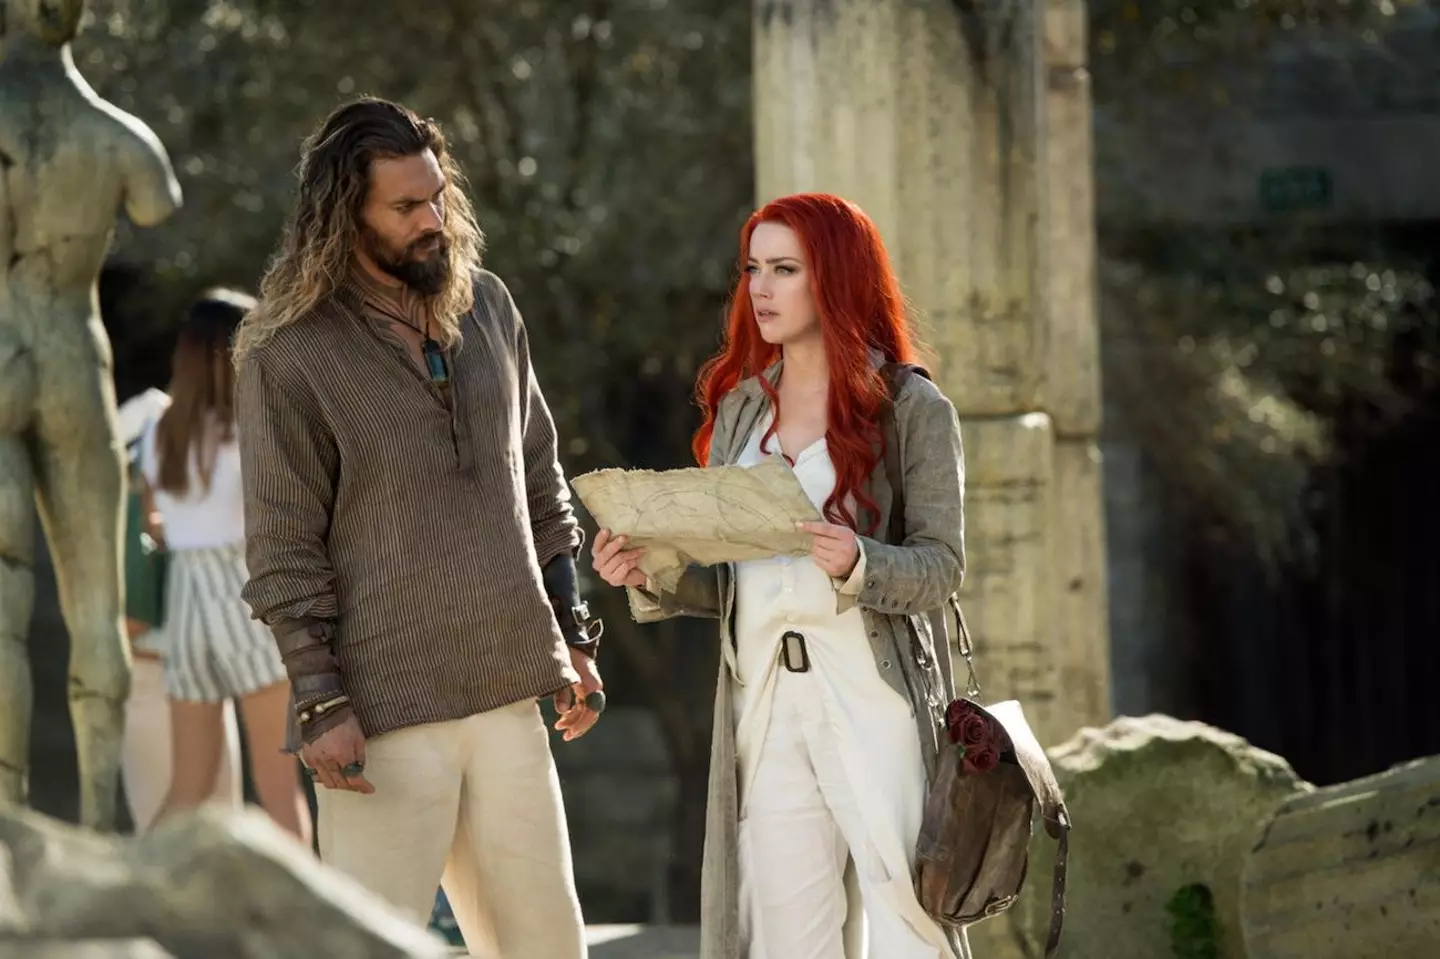 It has been claimed Amber Heard only kept her role in Aquaman 2 due to co-star Jason Momoa.